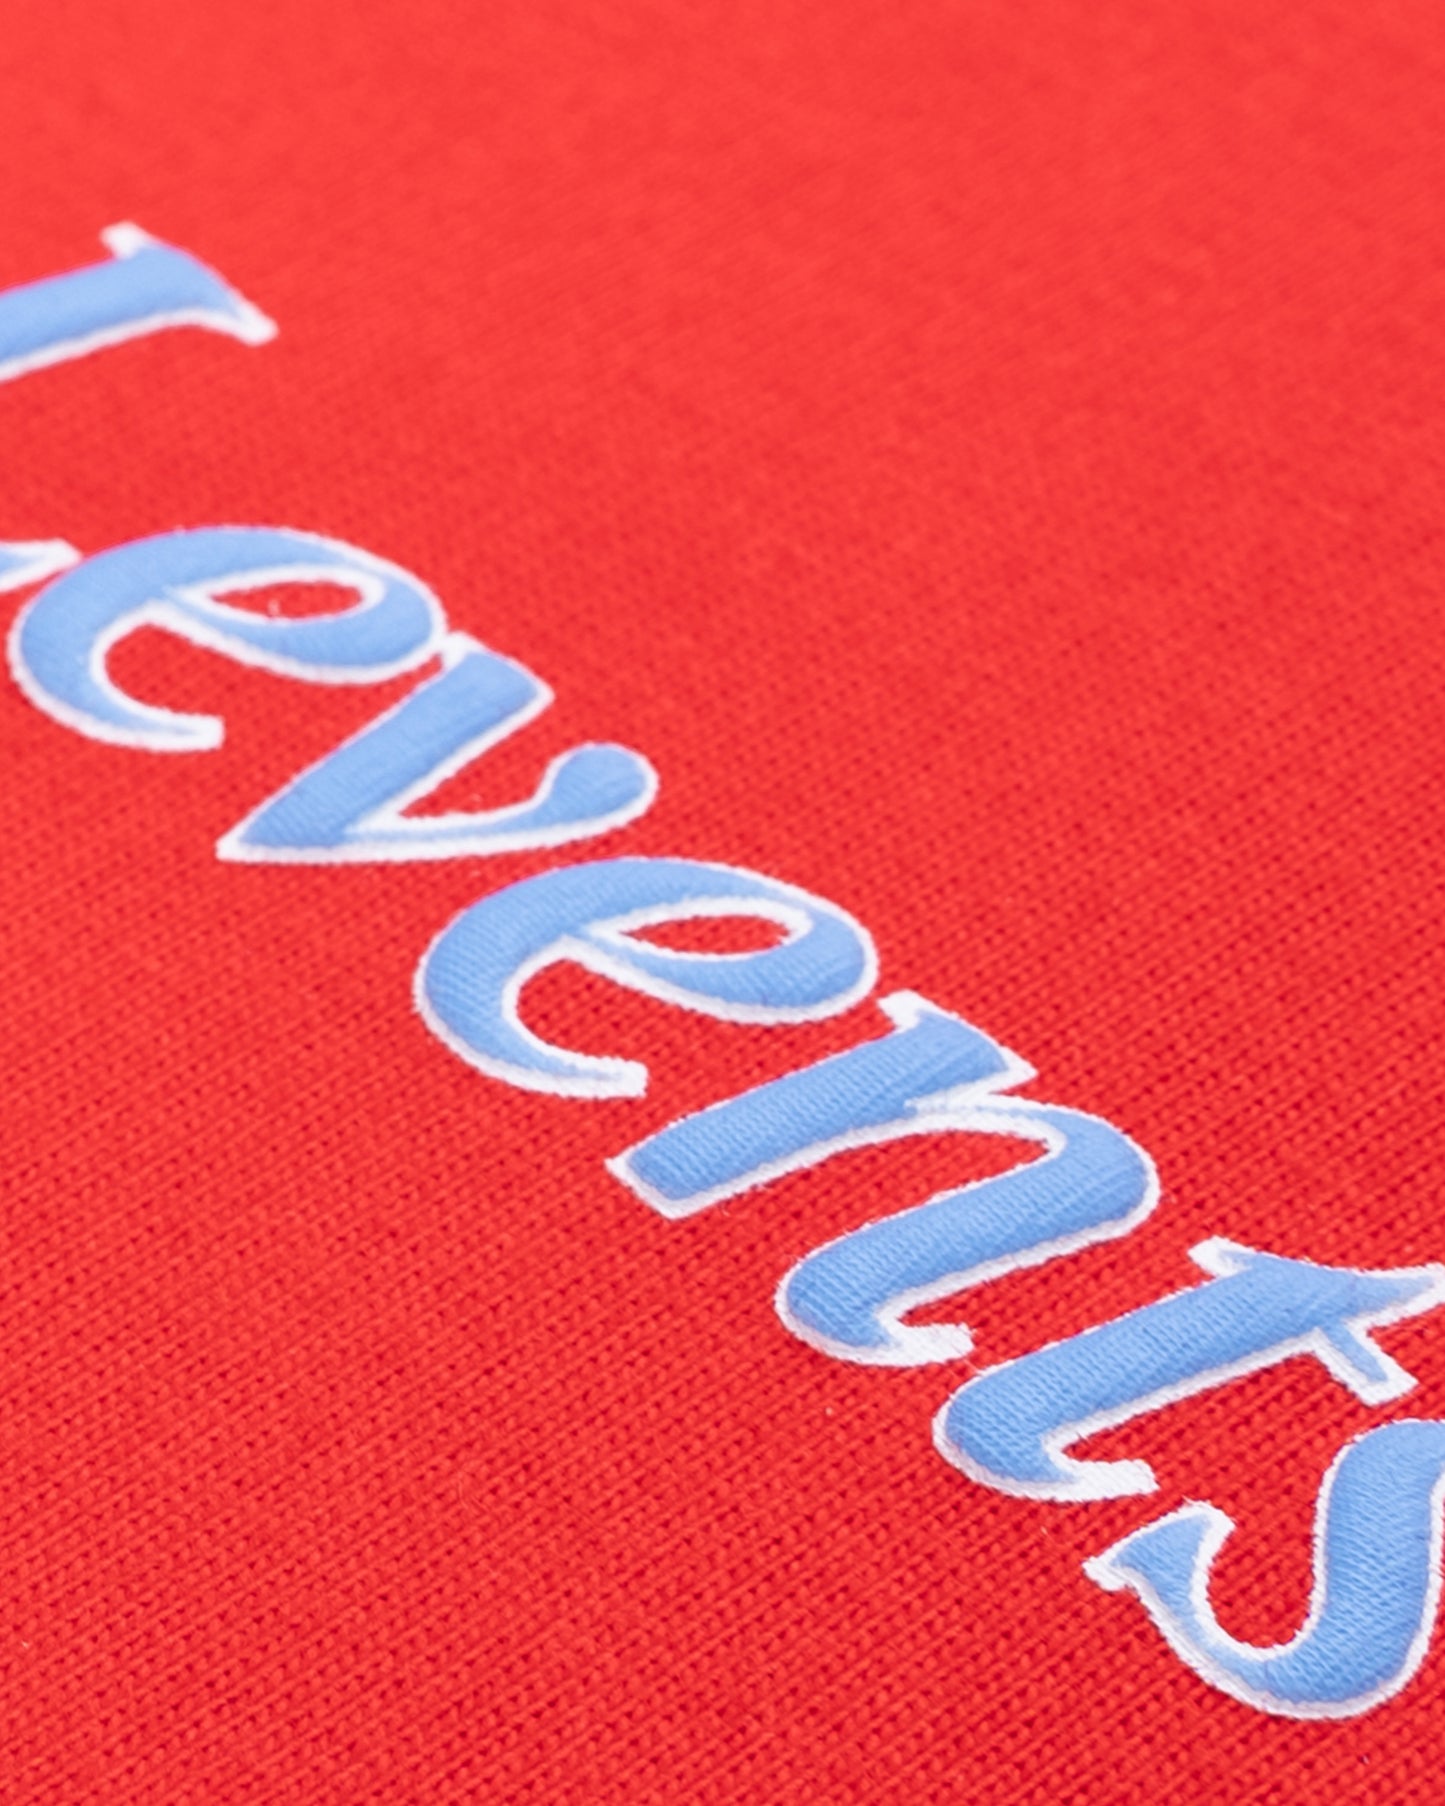 Levents® Graphic Tee/ Red